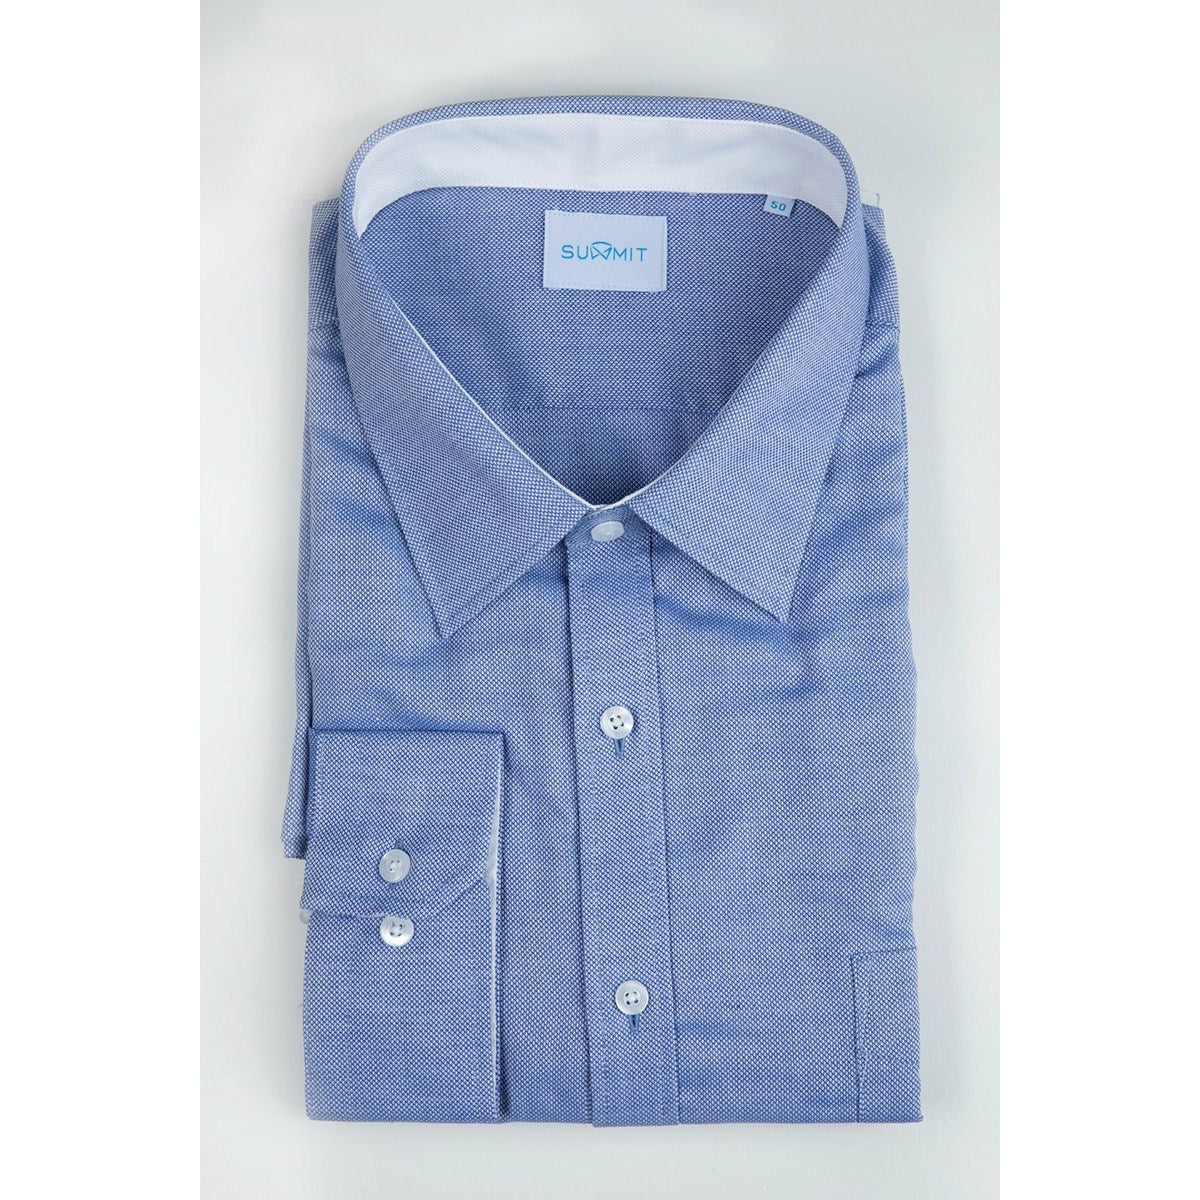 Summit Business Shirt in Navy Oxford